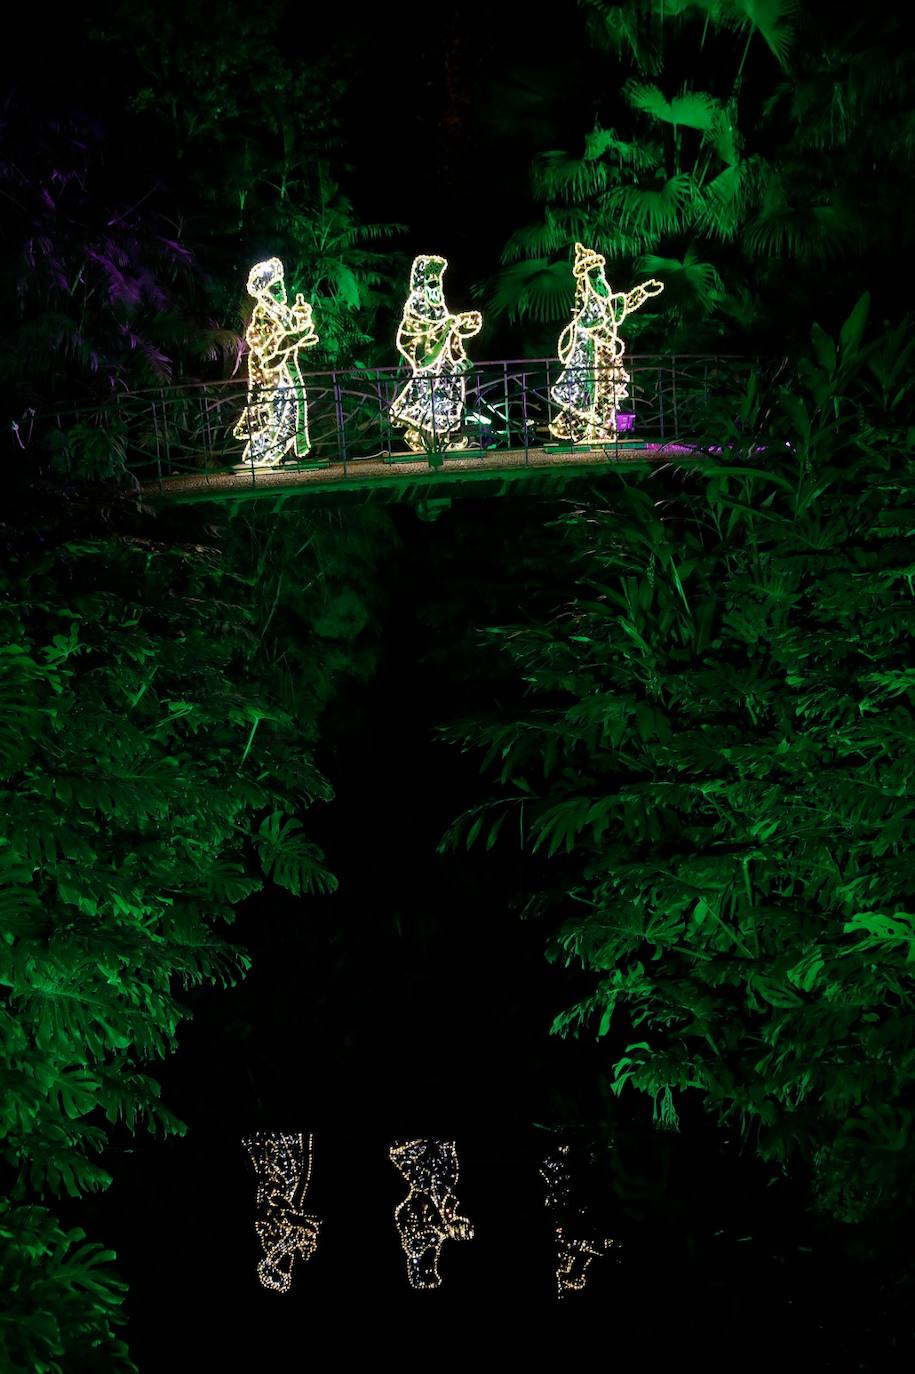 The Journey of the Star from the East, the new festive spectacular at Malaga's La Concepción botanical garden, can be visited until 8 January 2023.